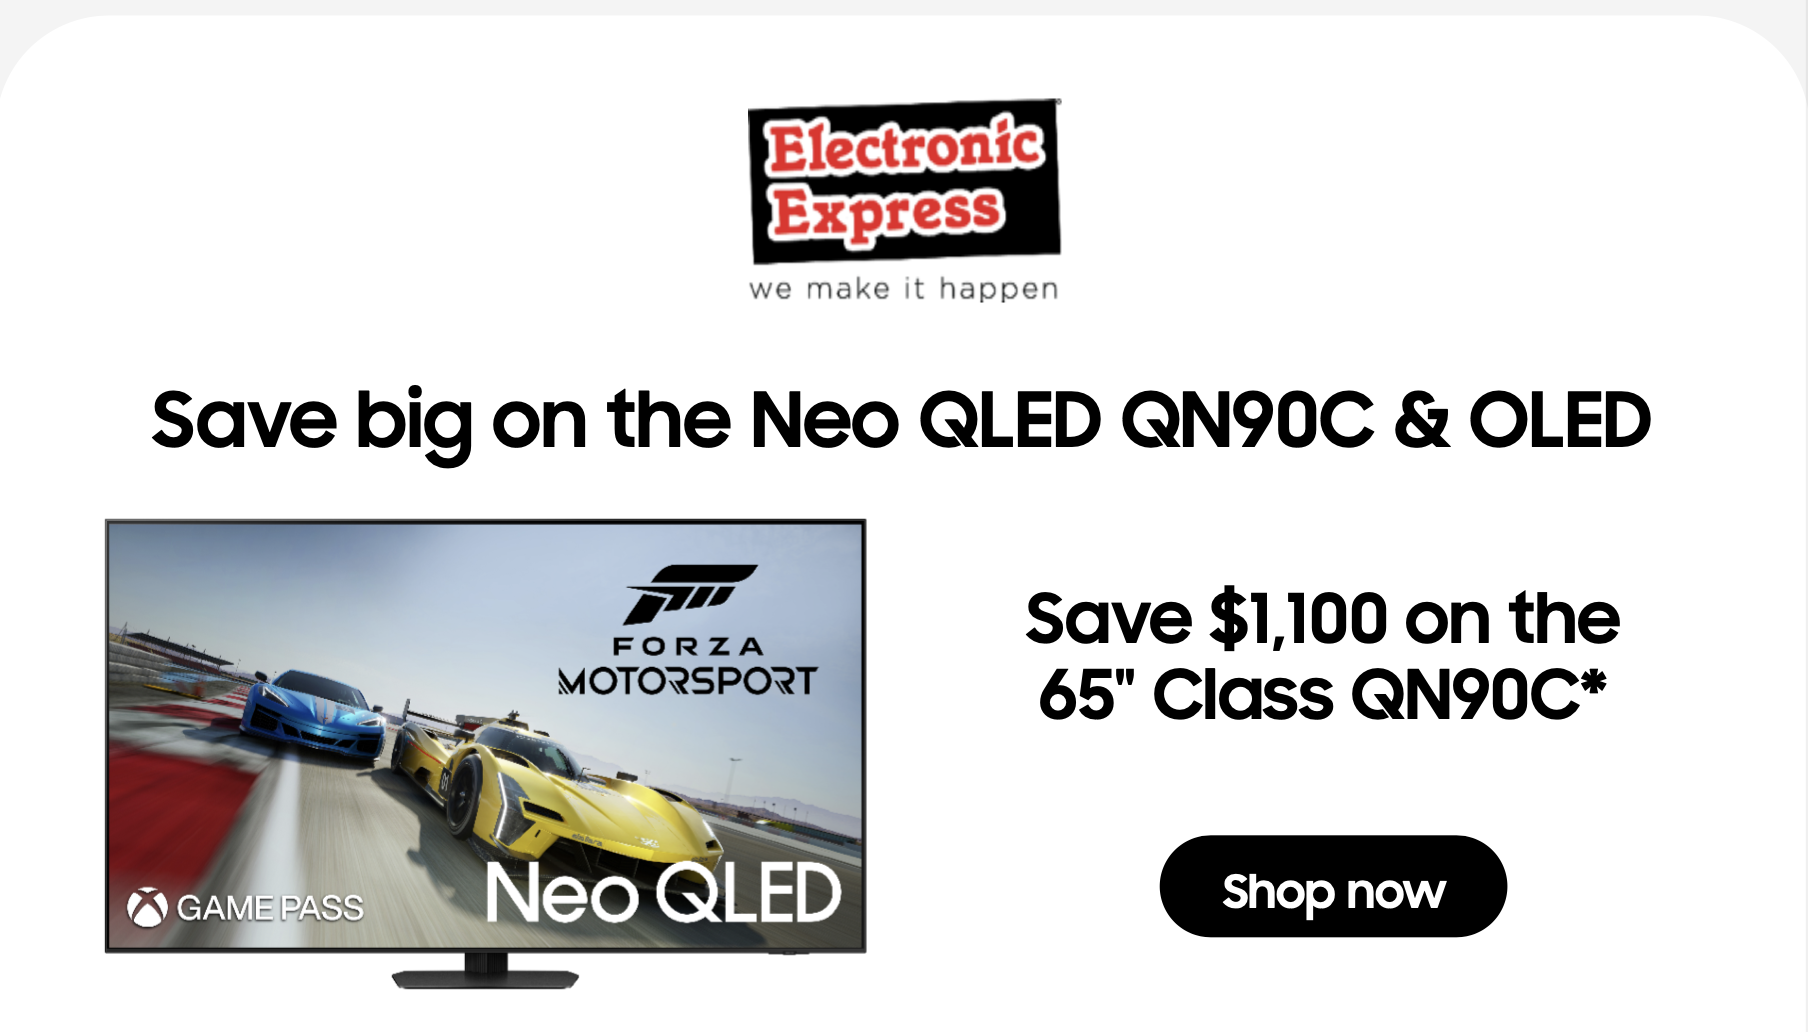 Save $1,100 on the 65" Class QN90C*